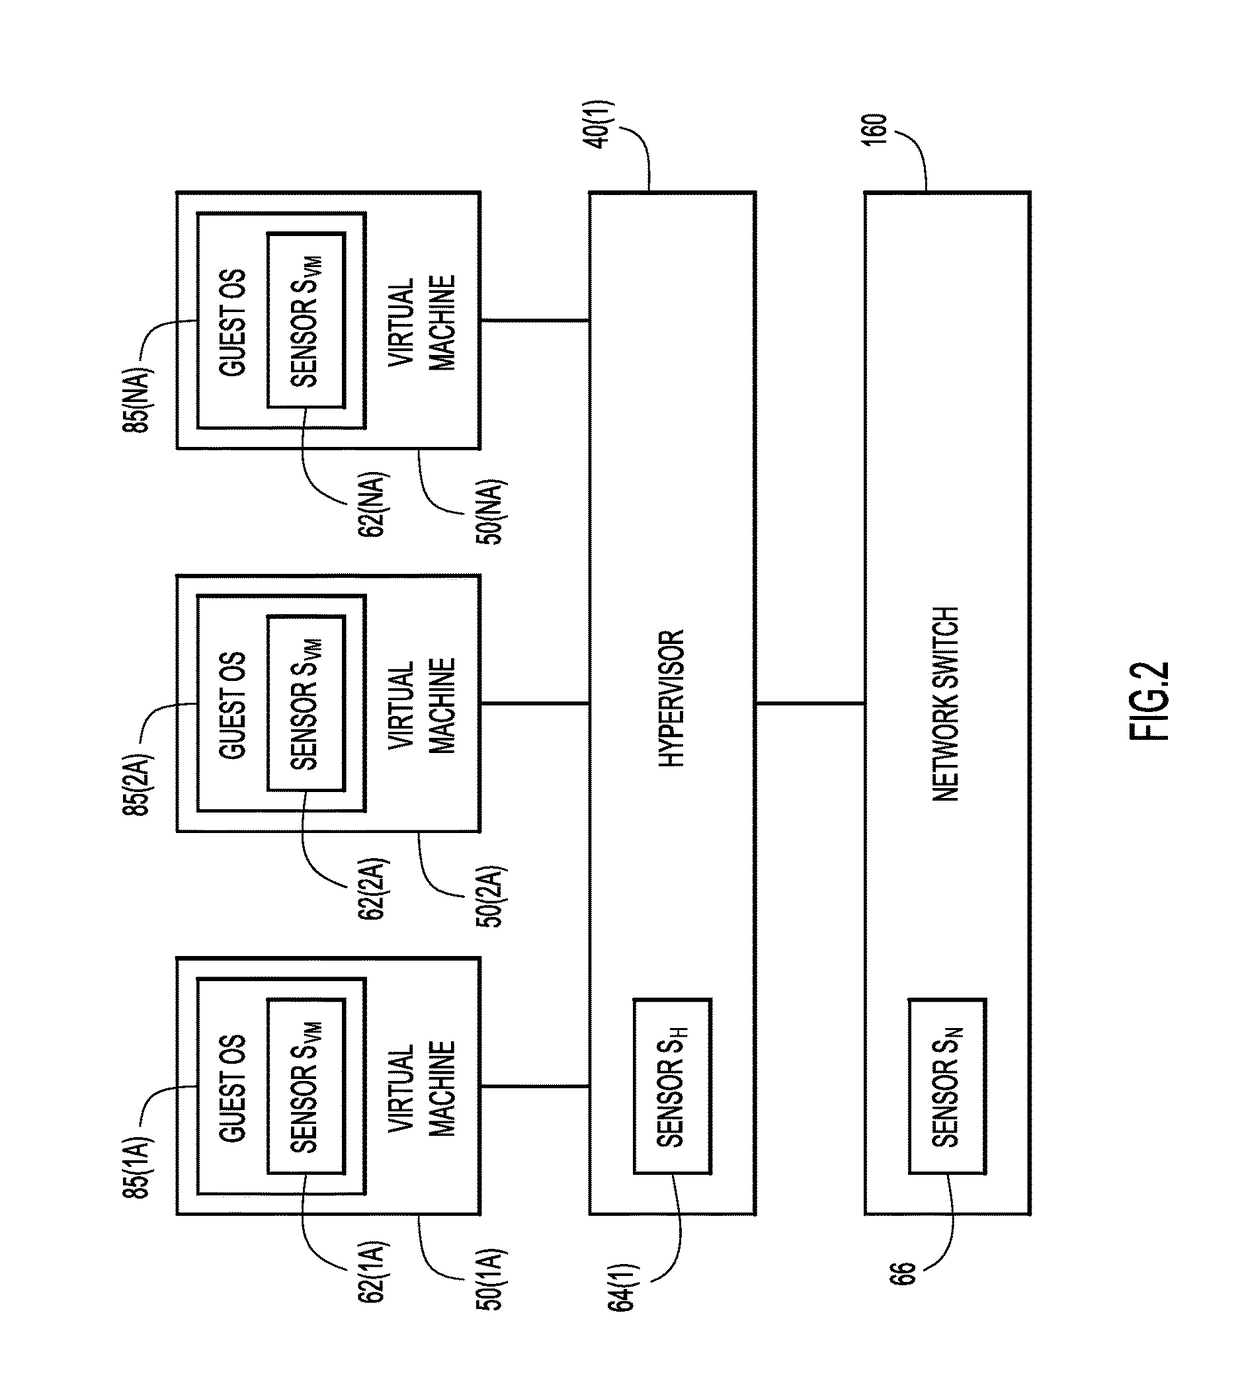 Automatically determining sensor location in a virtualized computing environment